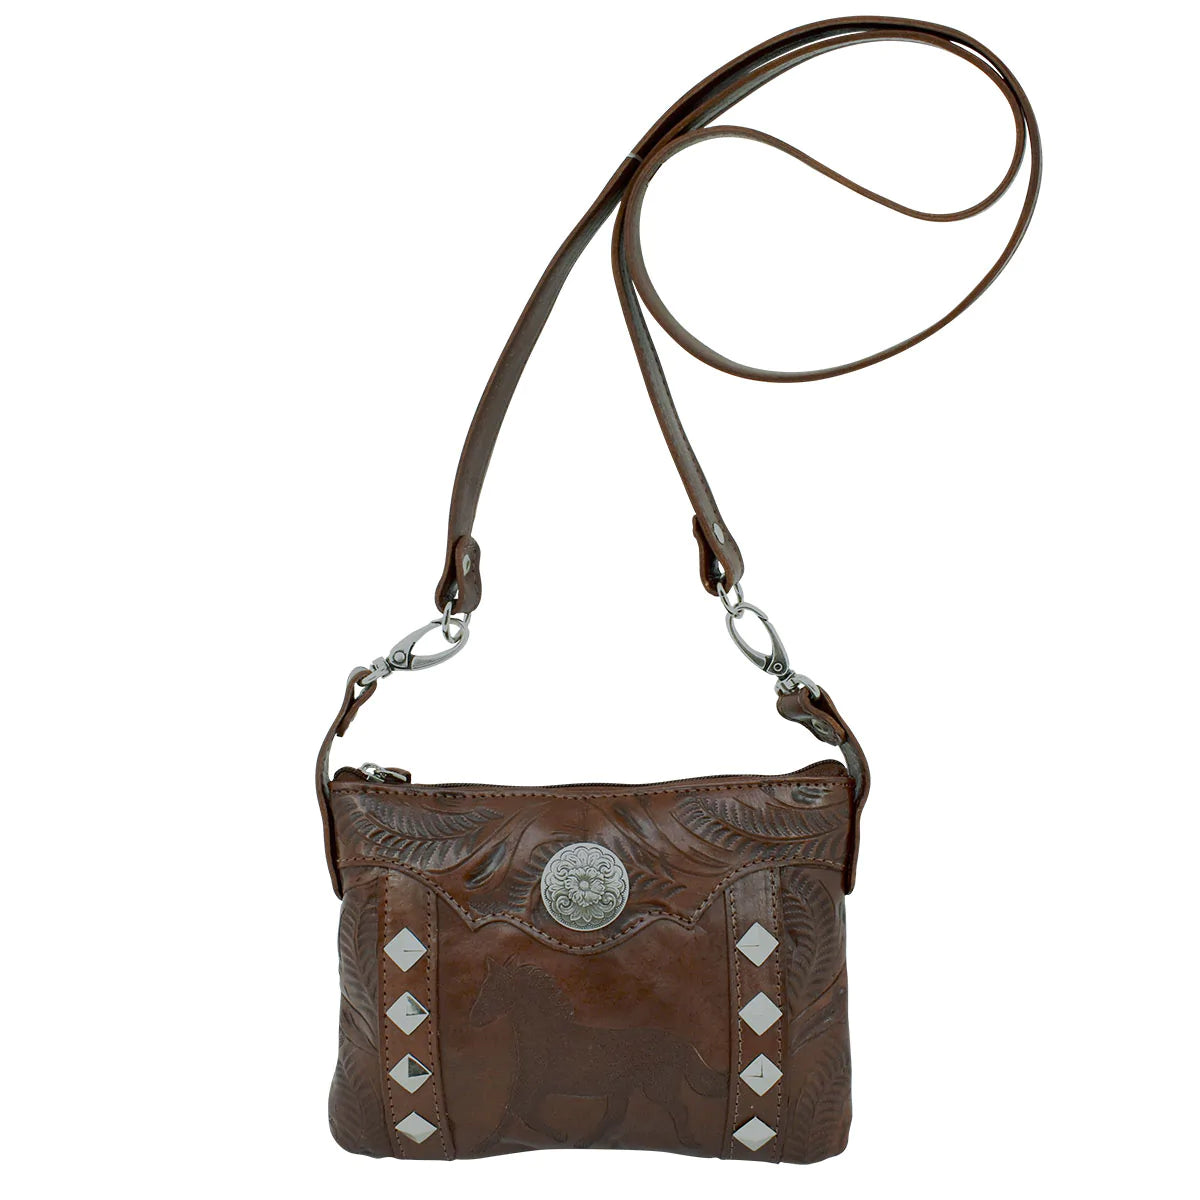 Go from a crossbody to a hip bag in seconds. Hand stained and hand-tooled genuine leather. Exterior & interior slip pockets. Removable strap allows this bag to be worn as a crossbody or on belt loops as a hip bag. Each piece is made by hand, one at a time. Available also in our Smyrna ,TN shop just outside Nashville. Product made in Paraguay by American West.